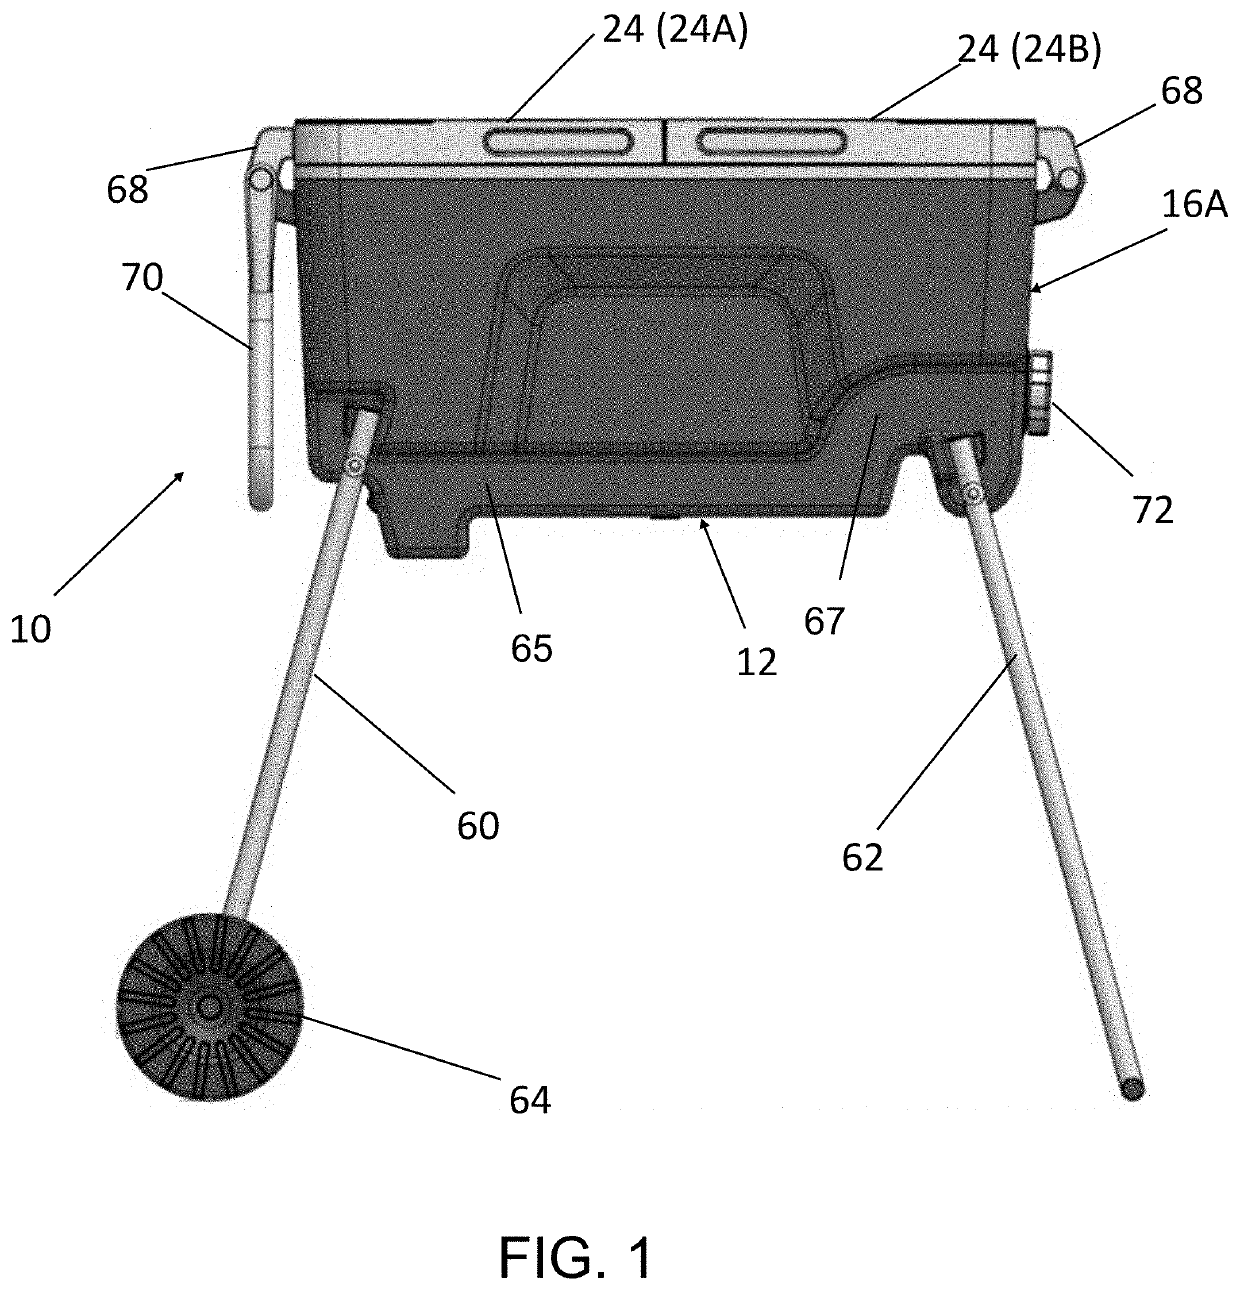 Portable rigid cooler and beverage dispenser with legs that extend and retract